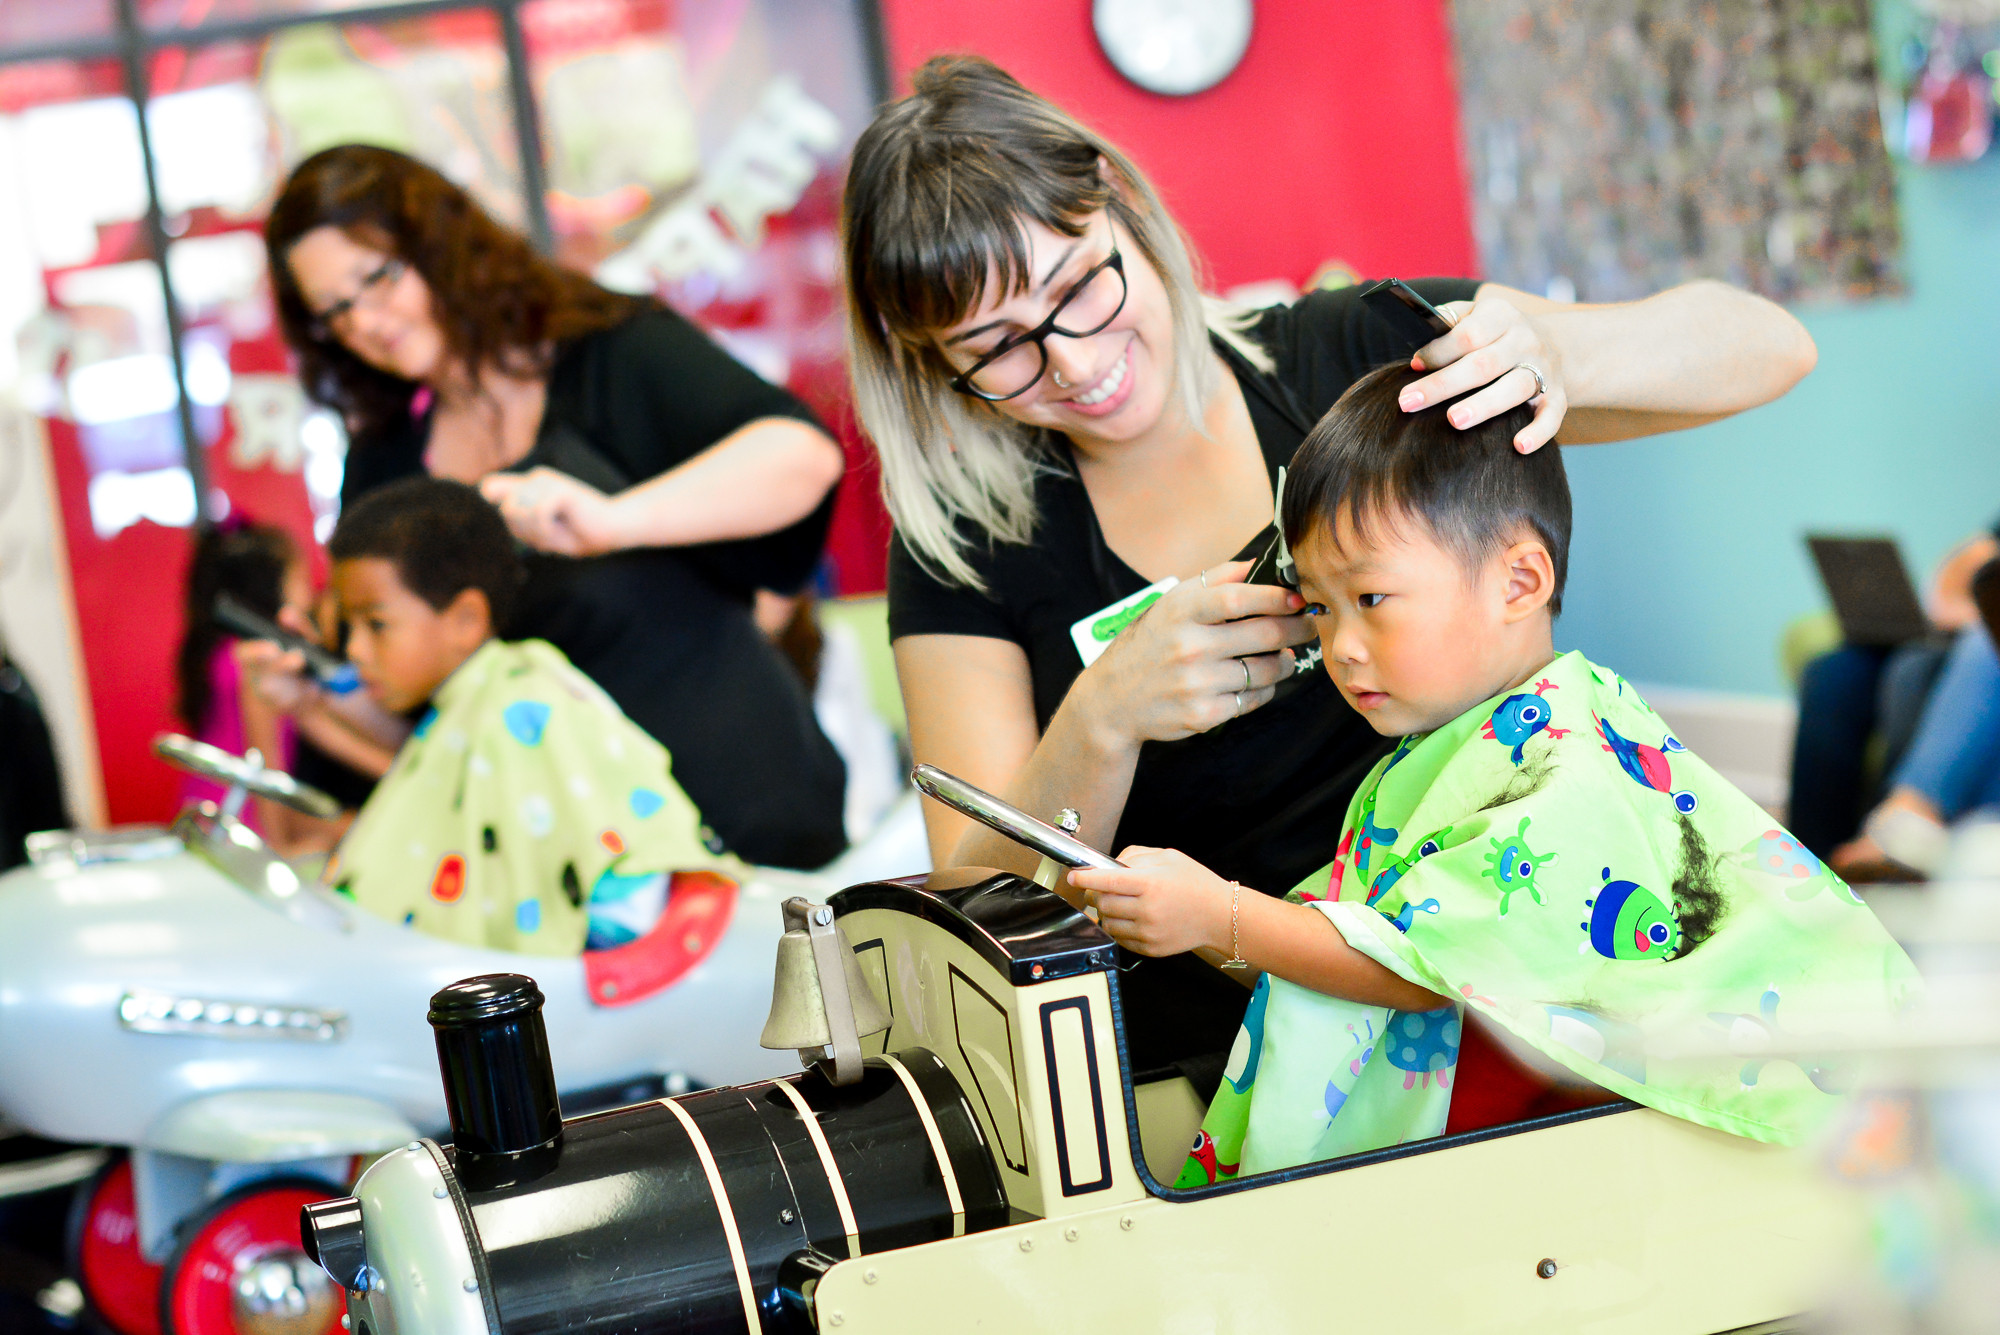 Kids Haircuts Orlando
 Pigtails & Crewcuts Haircuts for Kids Winter Springs